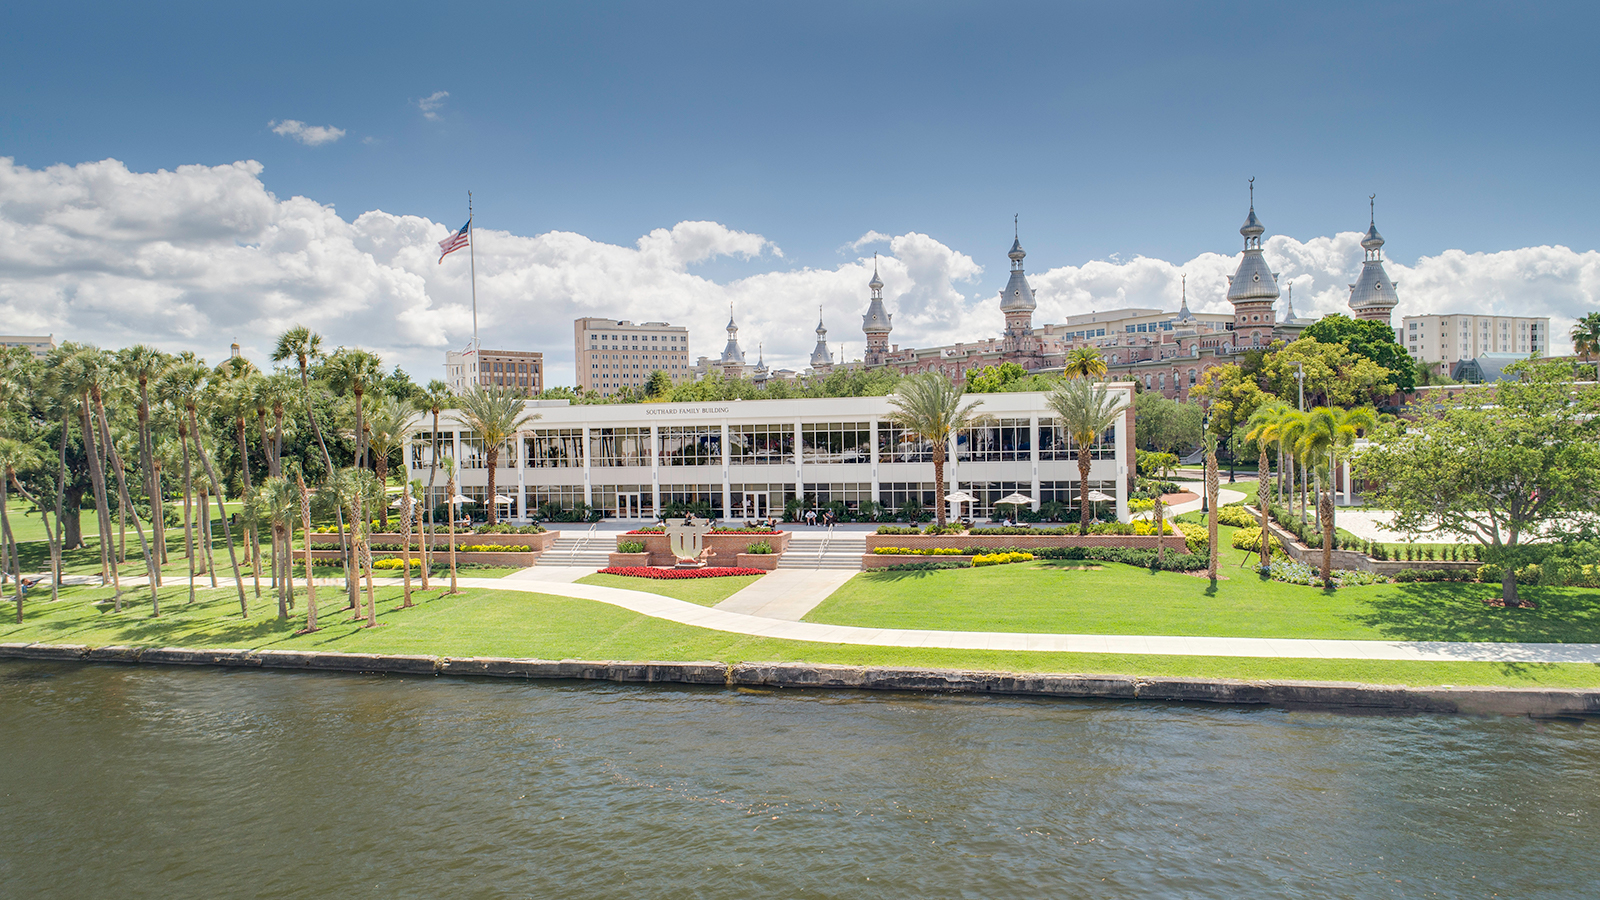 View of UT from the Hillsborough River